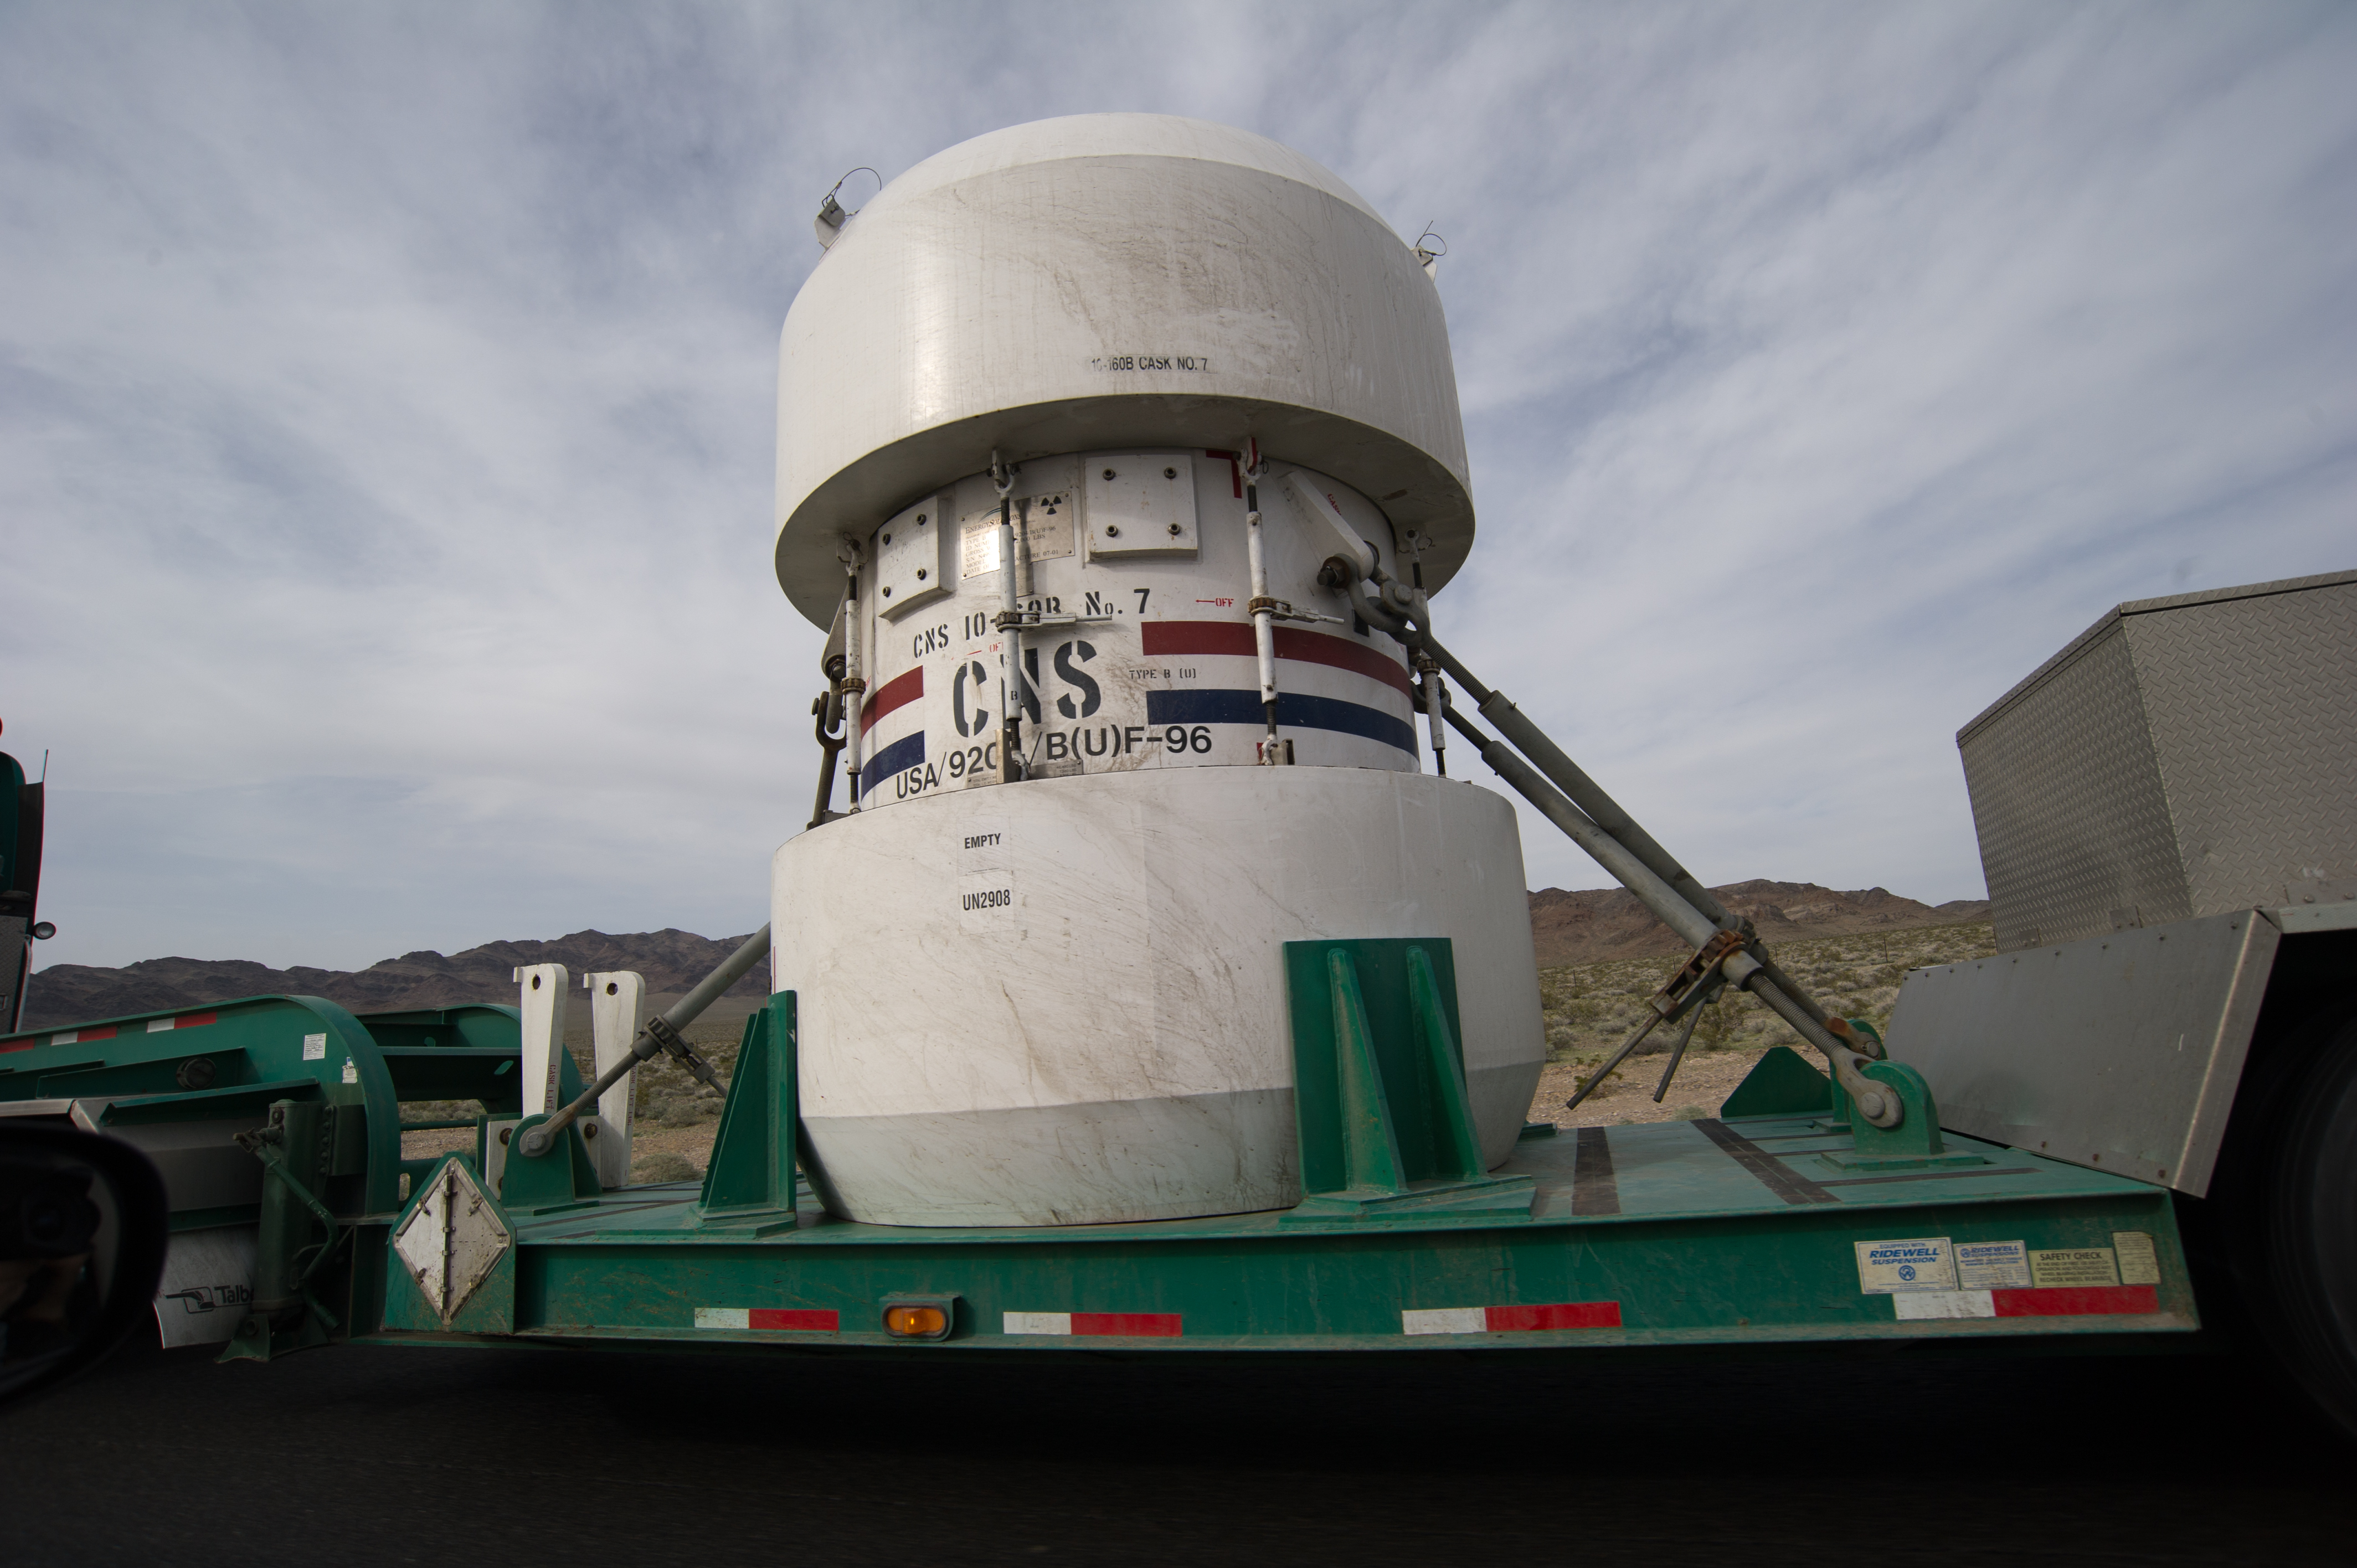 Nuclear Waste Container coming out of Nevada Test Site on public roads, March 2010